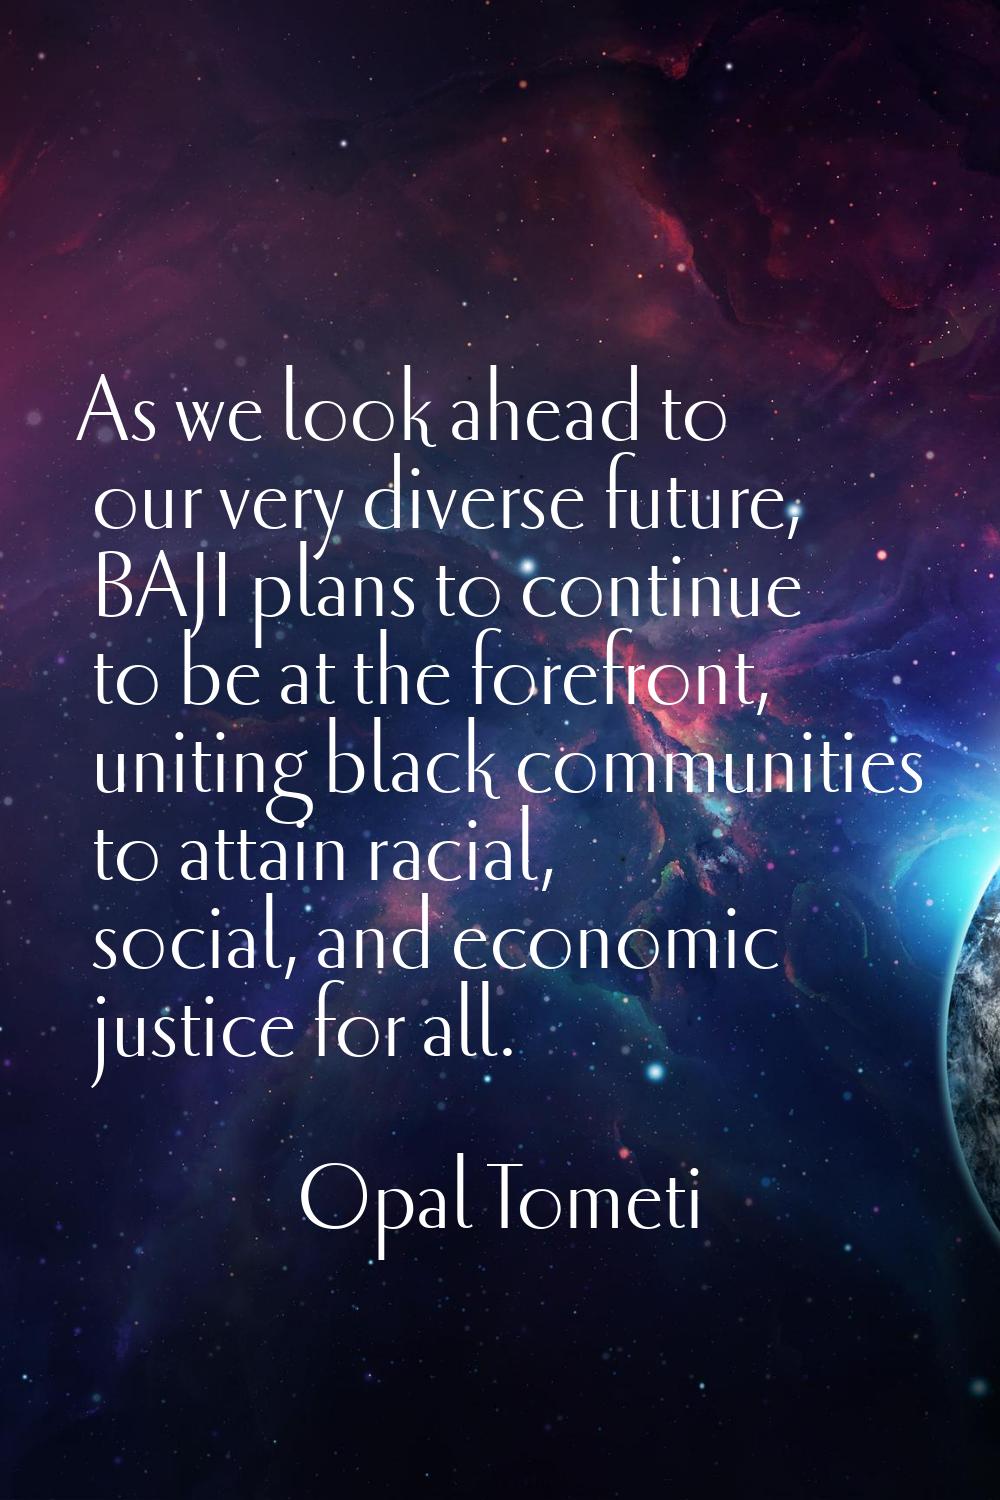 As we look ahead to our very diverse future, BAJI plans to continue to be at the forefront, uniting